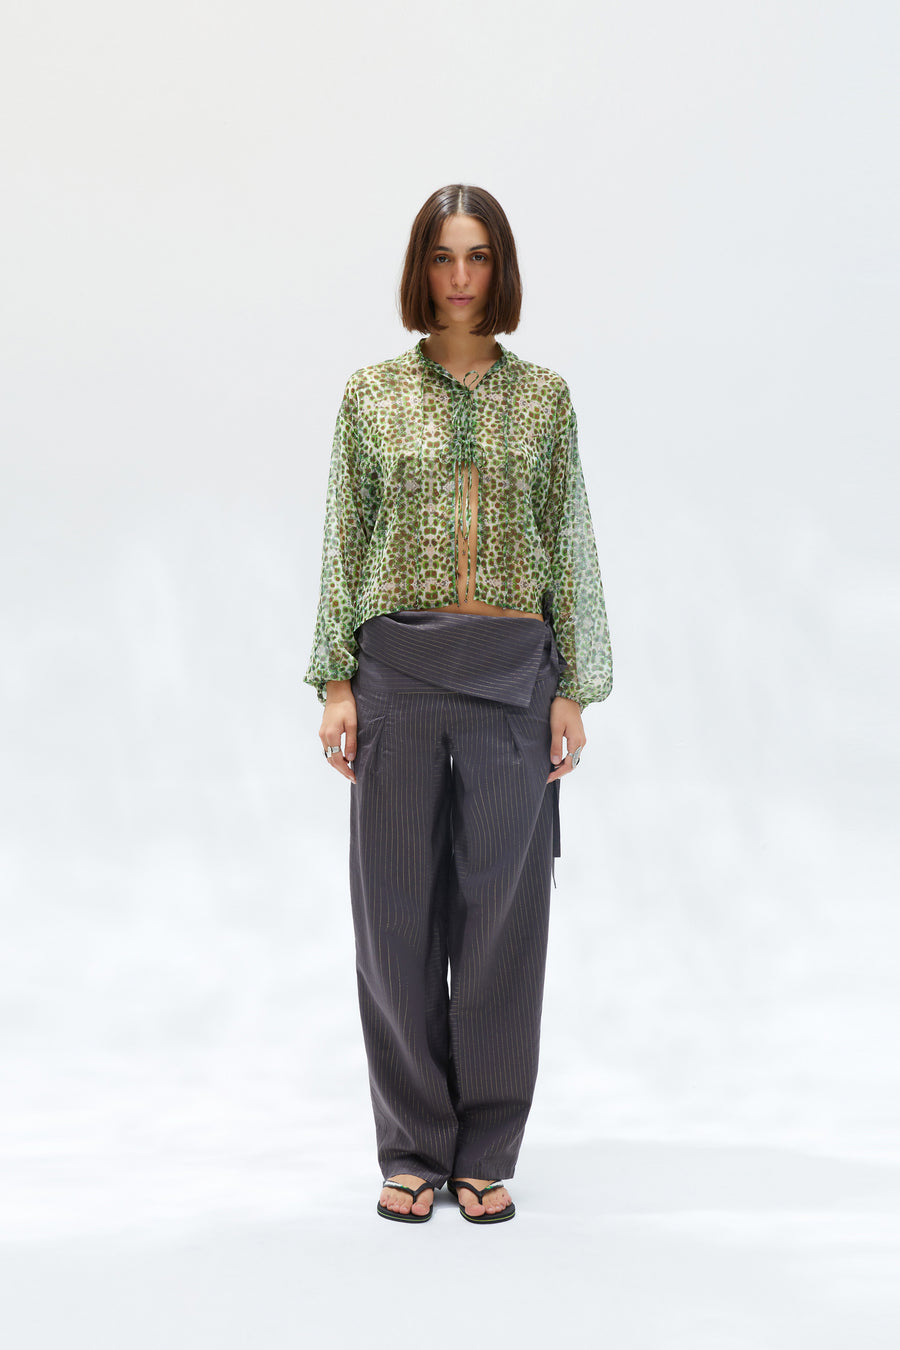 ELISE - Tie-front sheer shirt with bead details